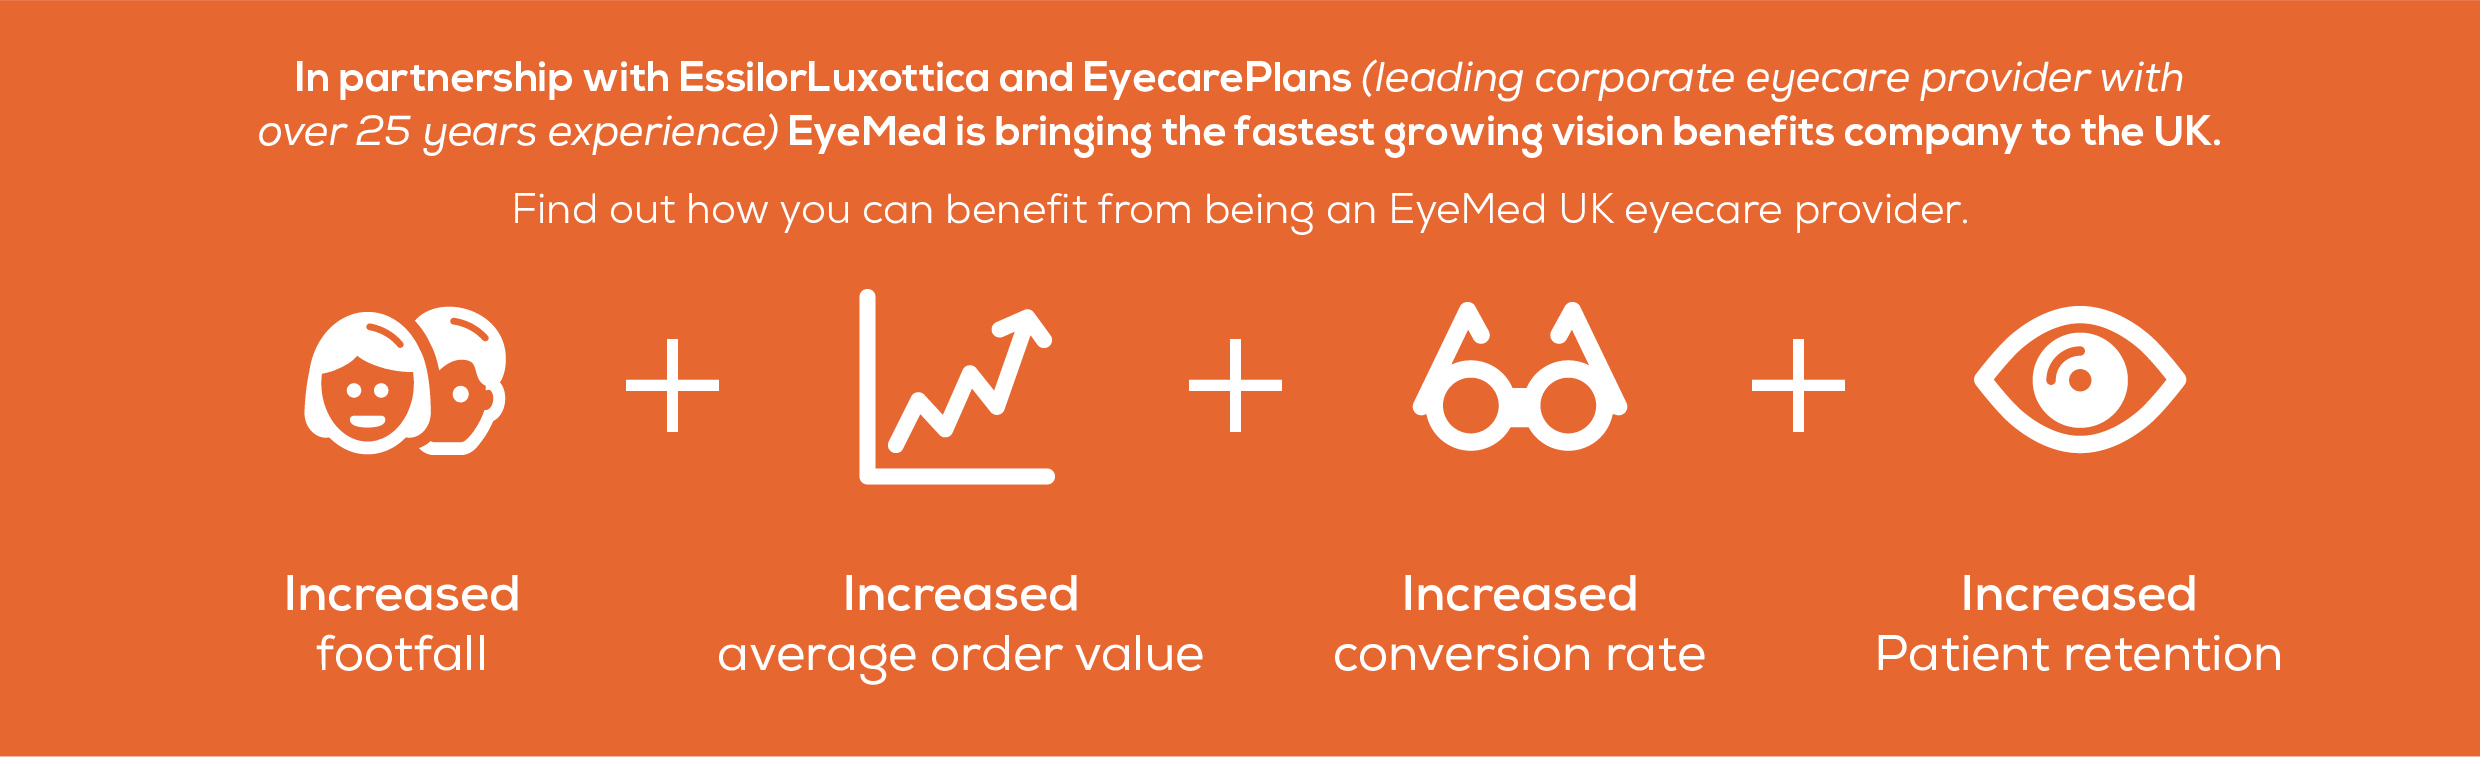 EyeMed - the fastest growing vision benefits company